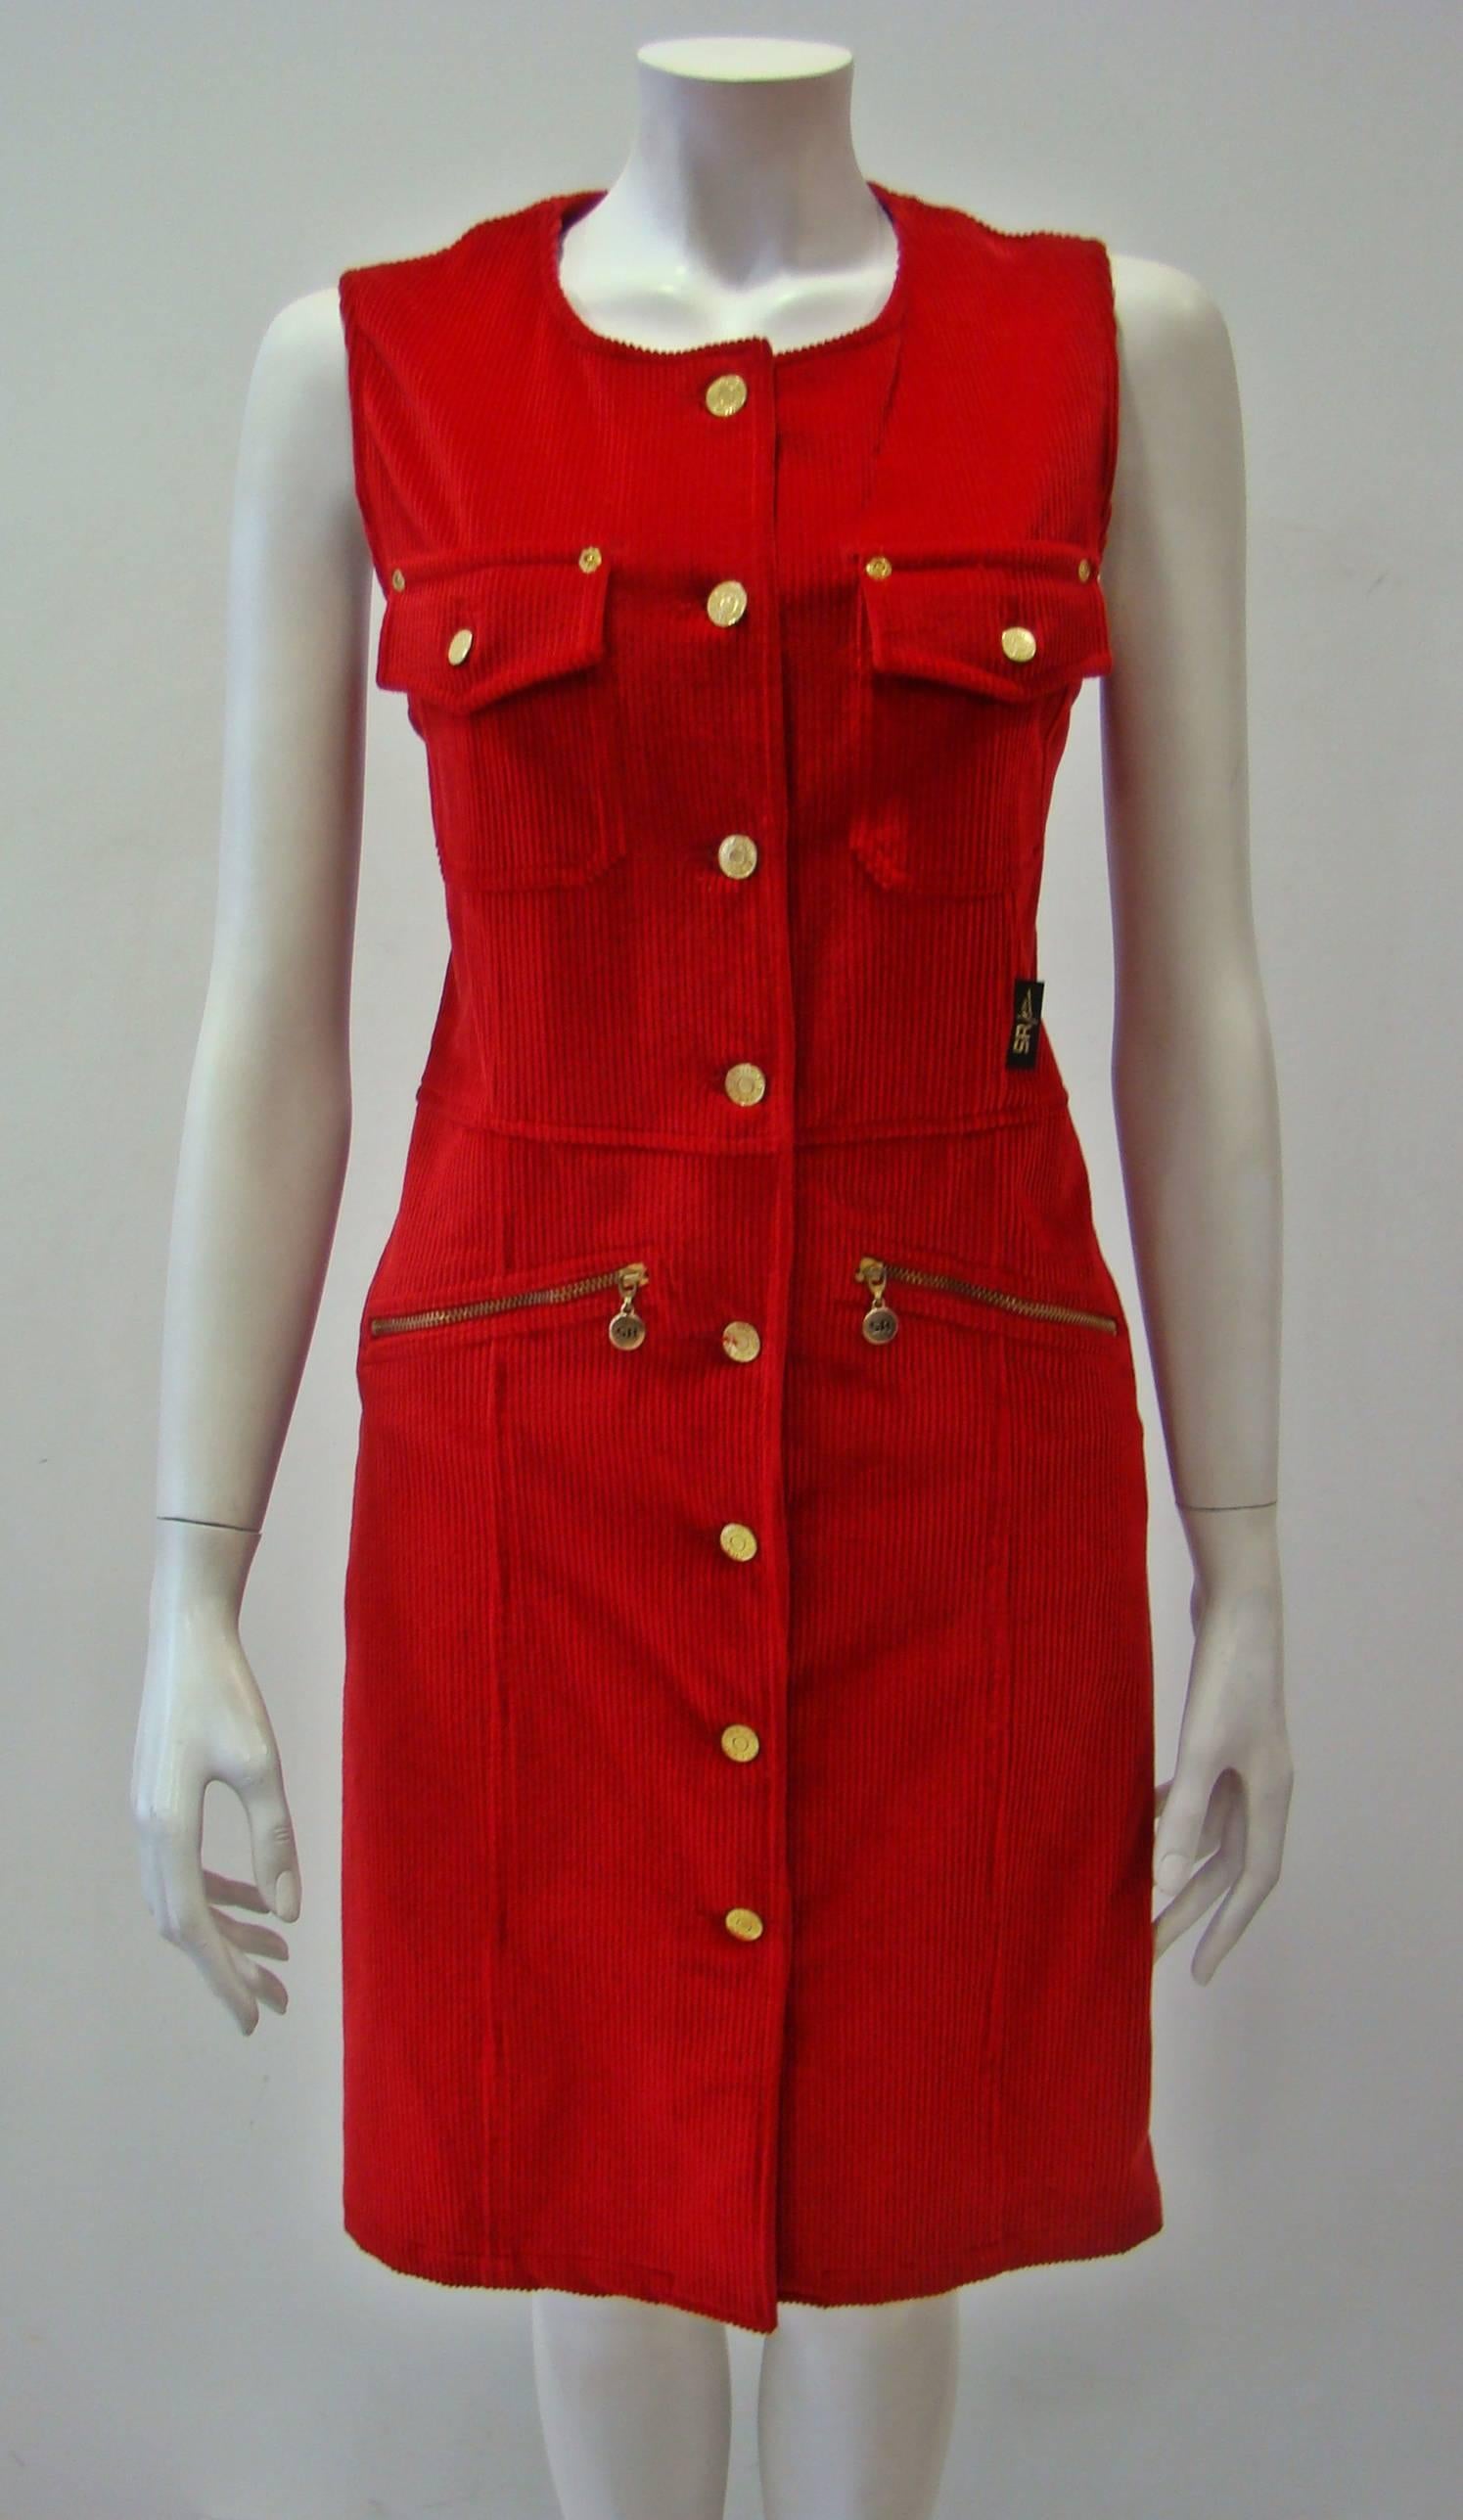 A Sleeveles Red Bengaline Dress From Sonia Rykiel Featuring Gold Buttoning Front, Two Small Front Zip Pockets And A Button Pocket At Back. Above Knee Length, Unlined. A Simple And Beautiful Dress Which Is An Easy Choice For Everywhere.